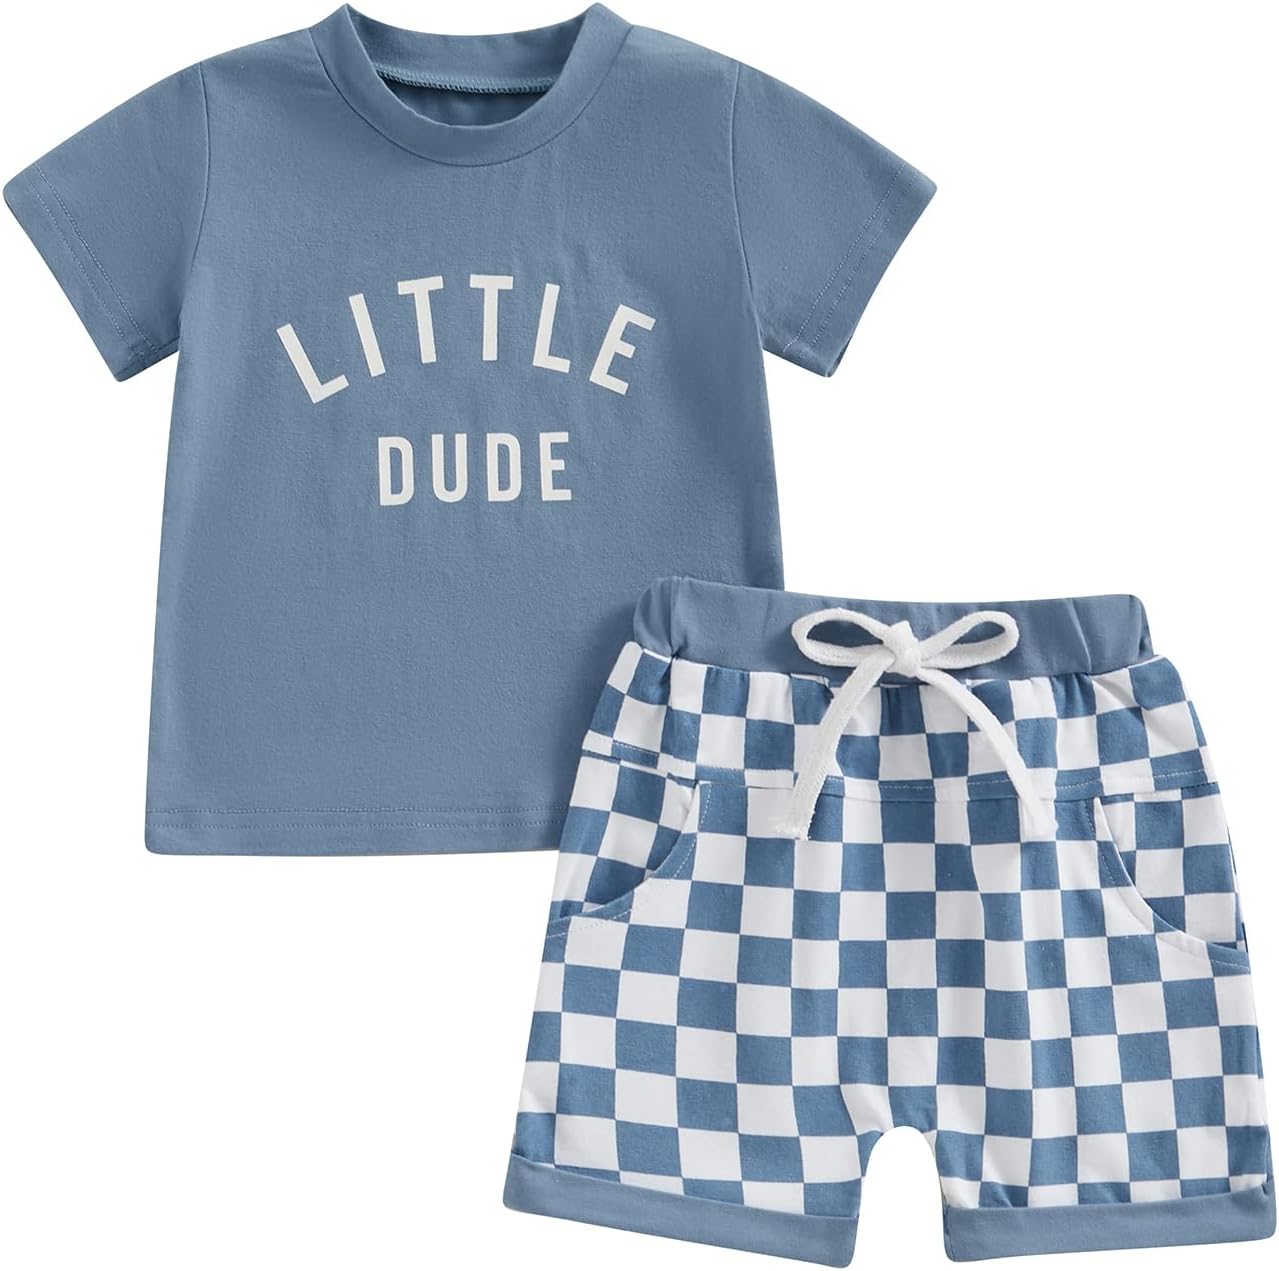 GOOCHEER Summer Outfit Infant Toddler Baby Boy 2PCS Clothes Set Letter Printed Short Sleeve T Shirt and Plaid Shorts Set